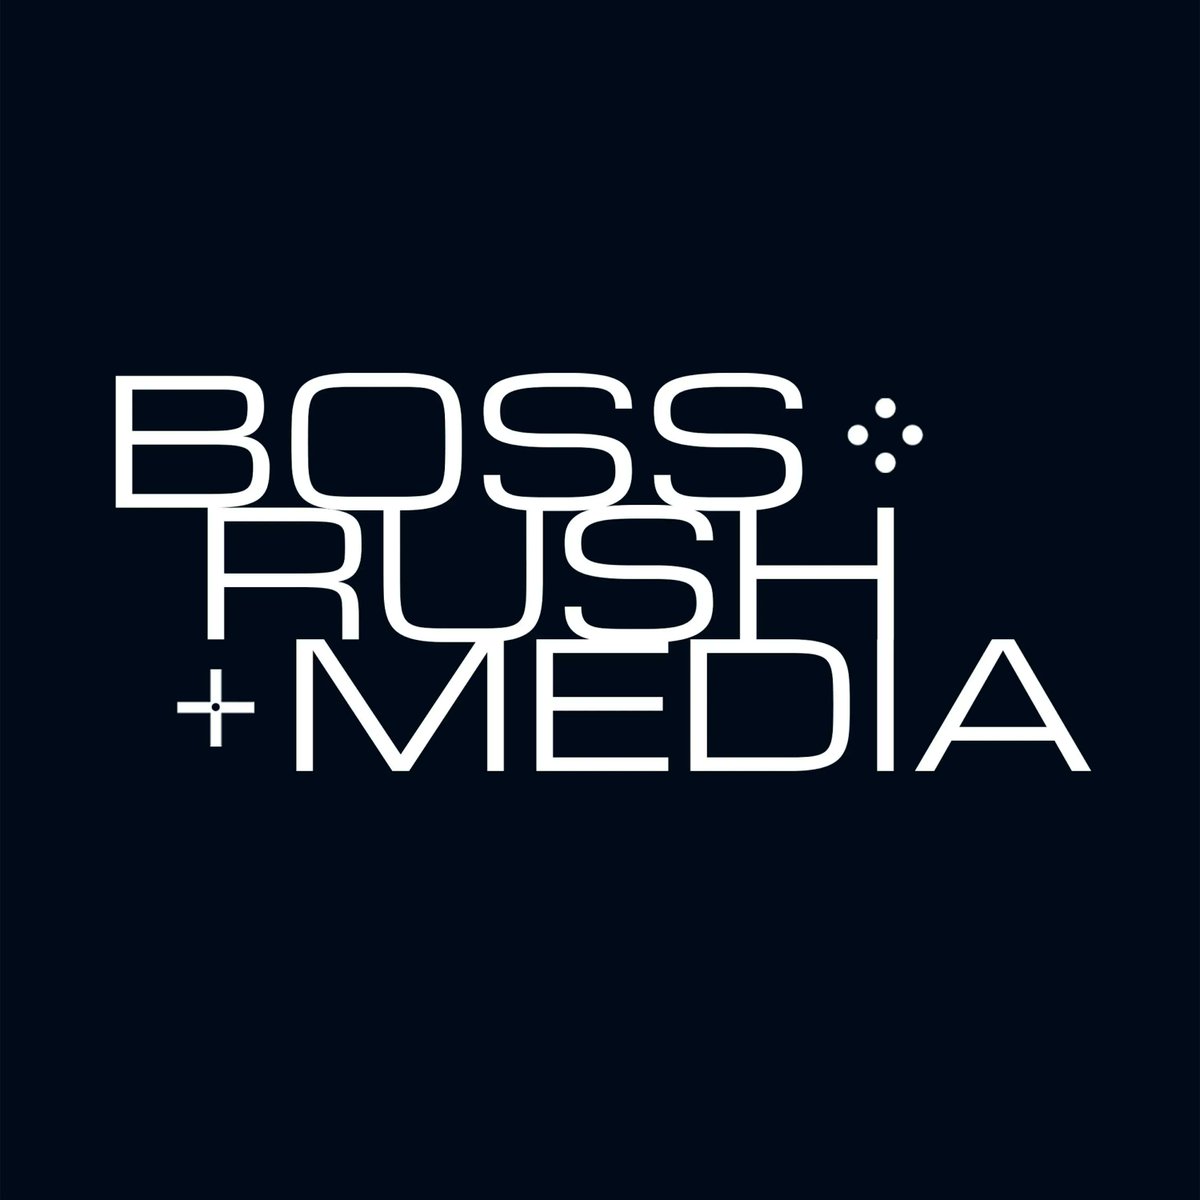 If you enjoy @BossRushPodcast, One V One #Interviews, #AfterDark, and #TalkTheWalk, consider supporting @BossRushMedia on Patreon for early access to these shows and more for as little as $1 a month. #PatreonCreator #VideoGames #PatreonPodcasts

buff.ly/3QFpUbb